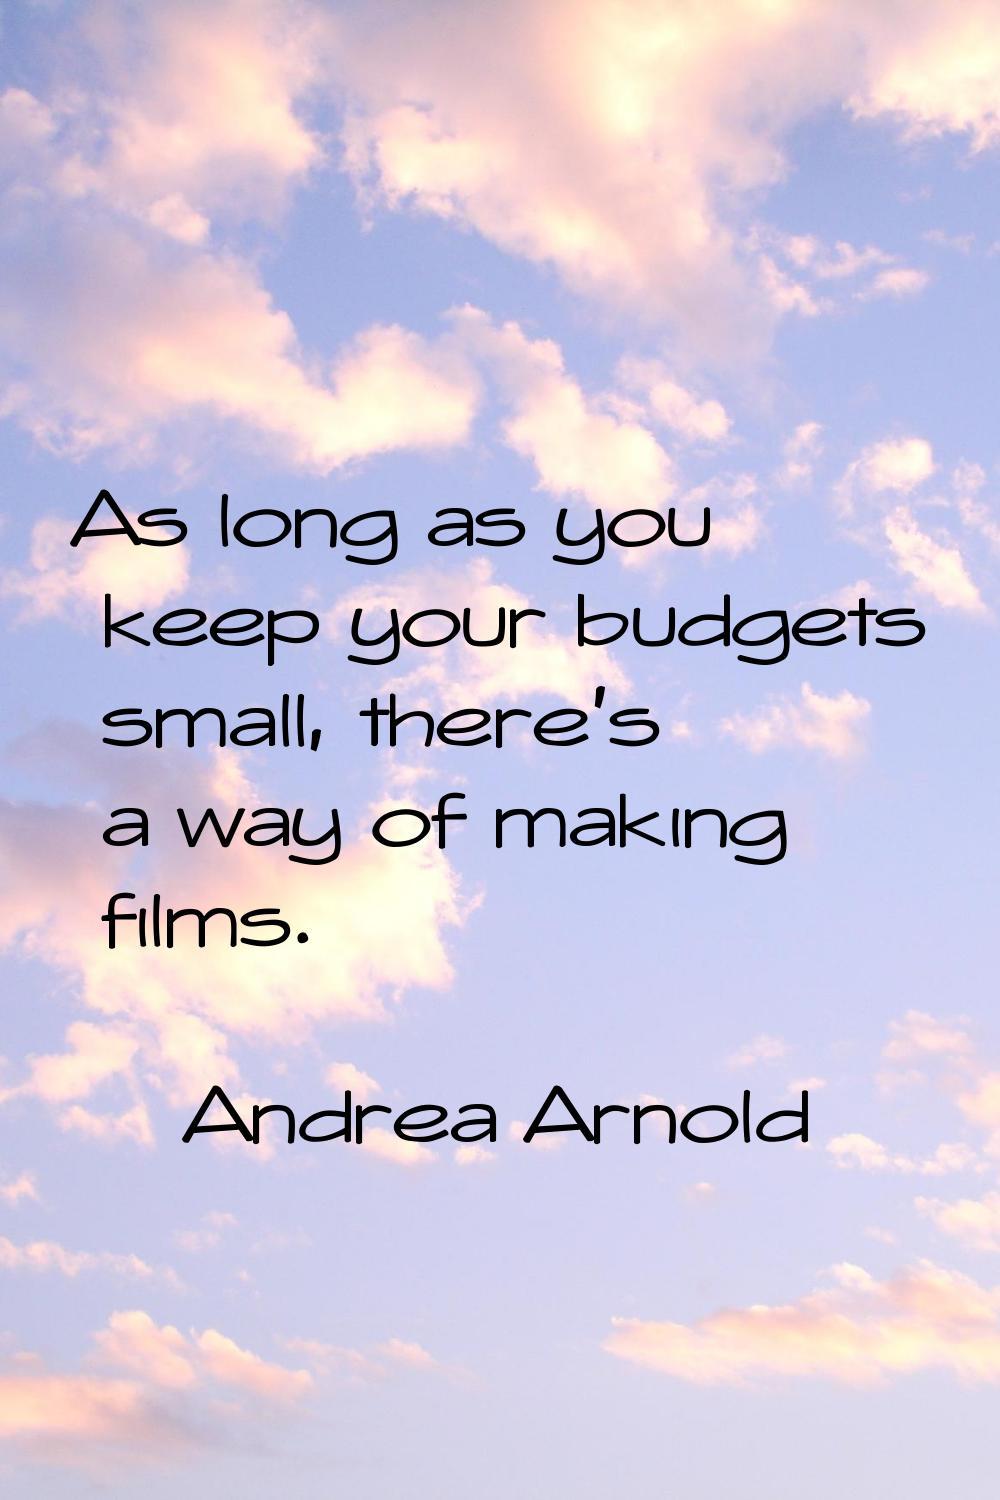 As long as you keep your budgets small, there's a way of making films.